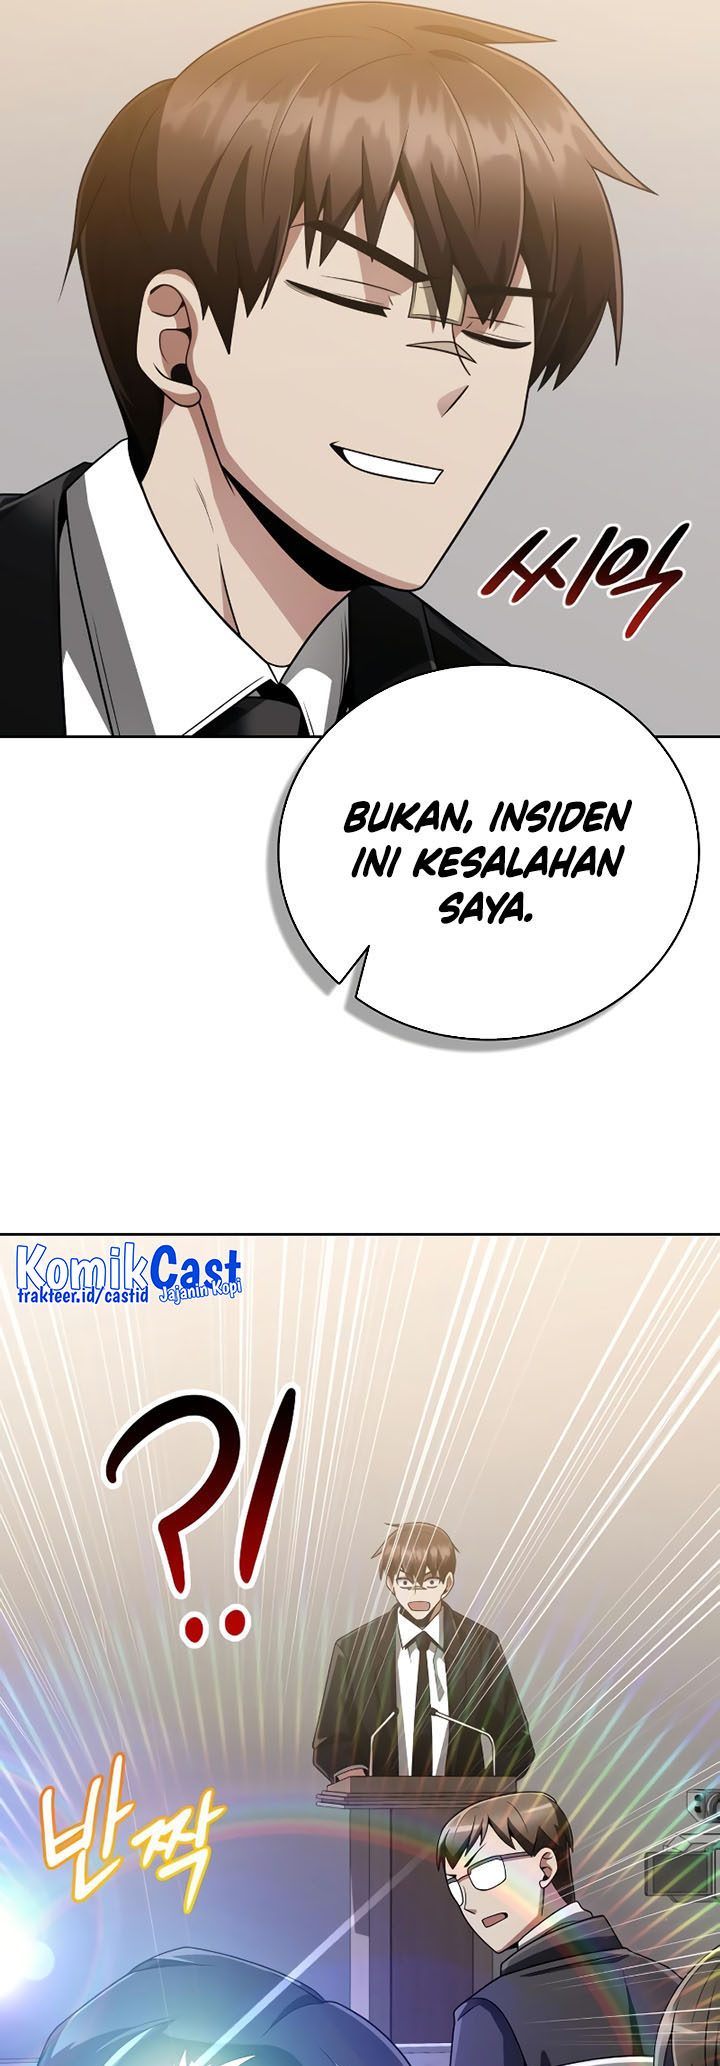 Dilarang COPAS - situs resmi www.mangacanblog.com - Komik clever cleaning life of the returned genius hunter 021 - chapter 21 22 Indonesia clever cleaning life of the returned genius hunter 021 - chapter 21 Terbaru 33|Baca Manga Komik Indonesia|Mangacan